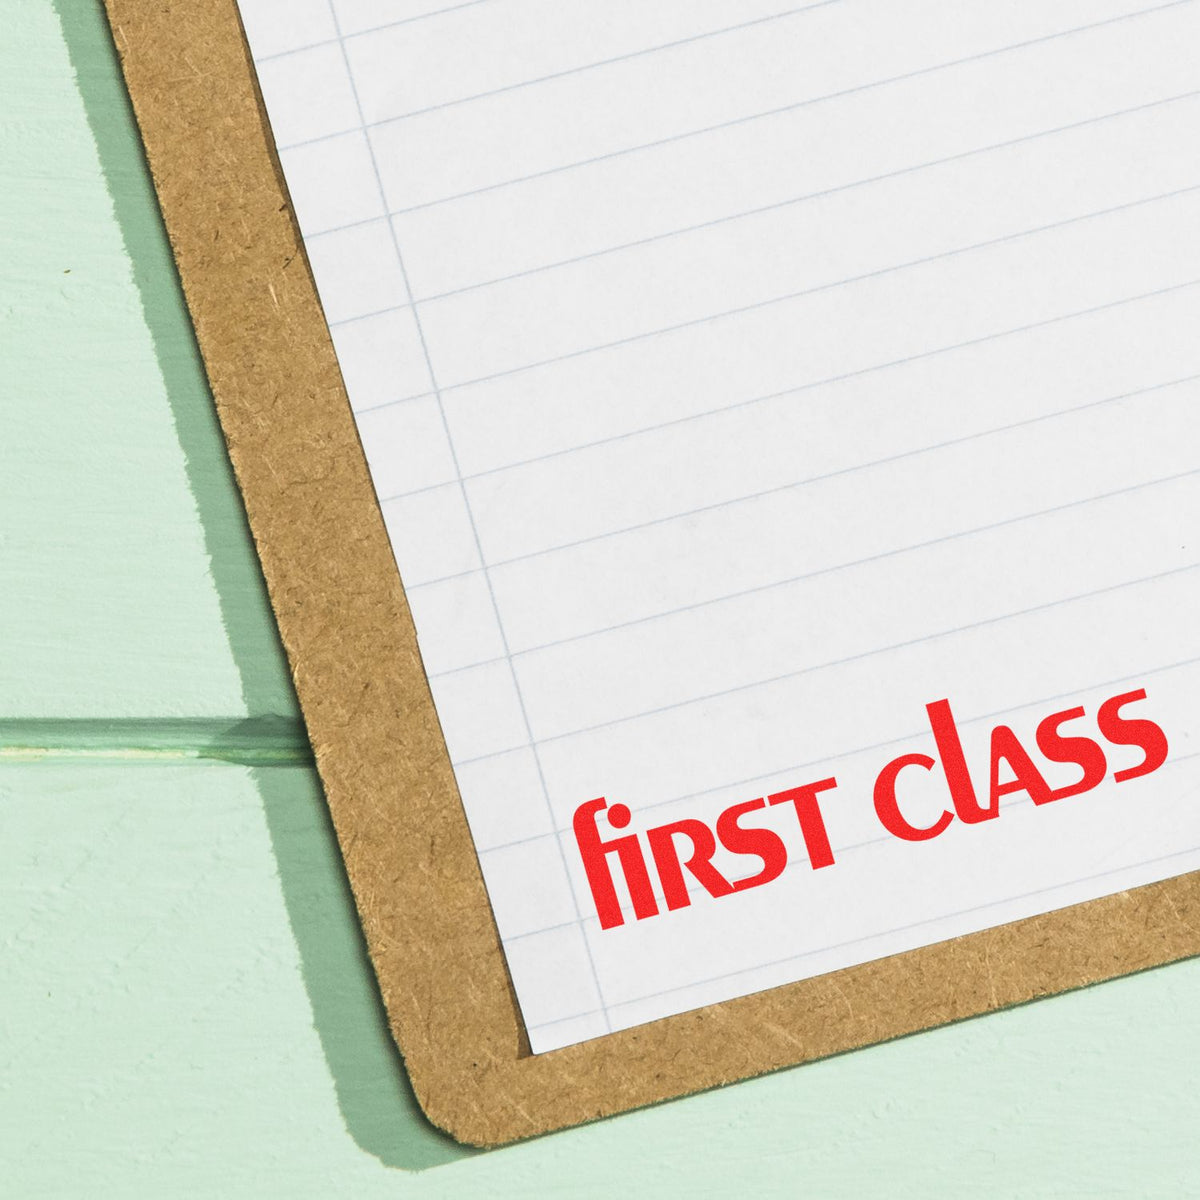 Large Lower Case First Class Rubber Stamp In Use Photo